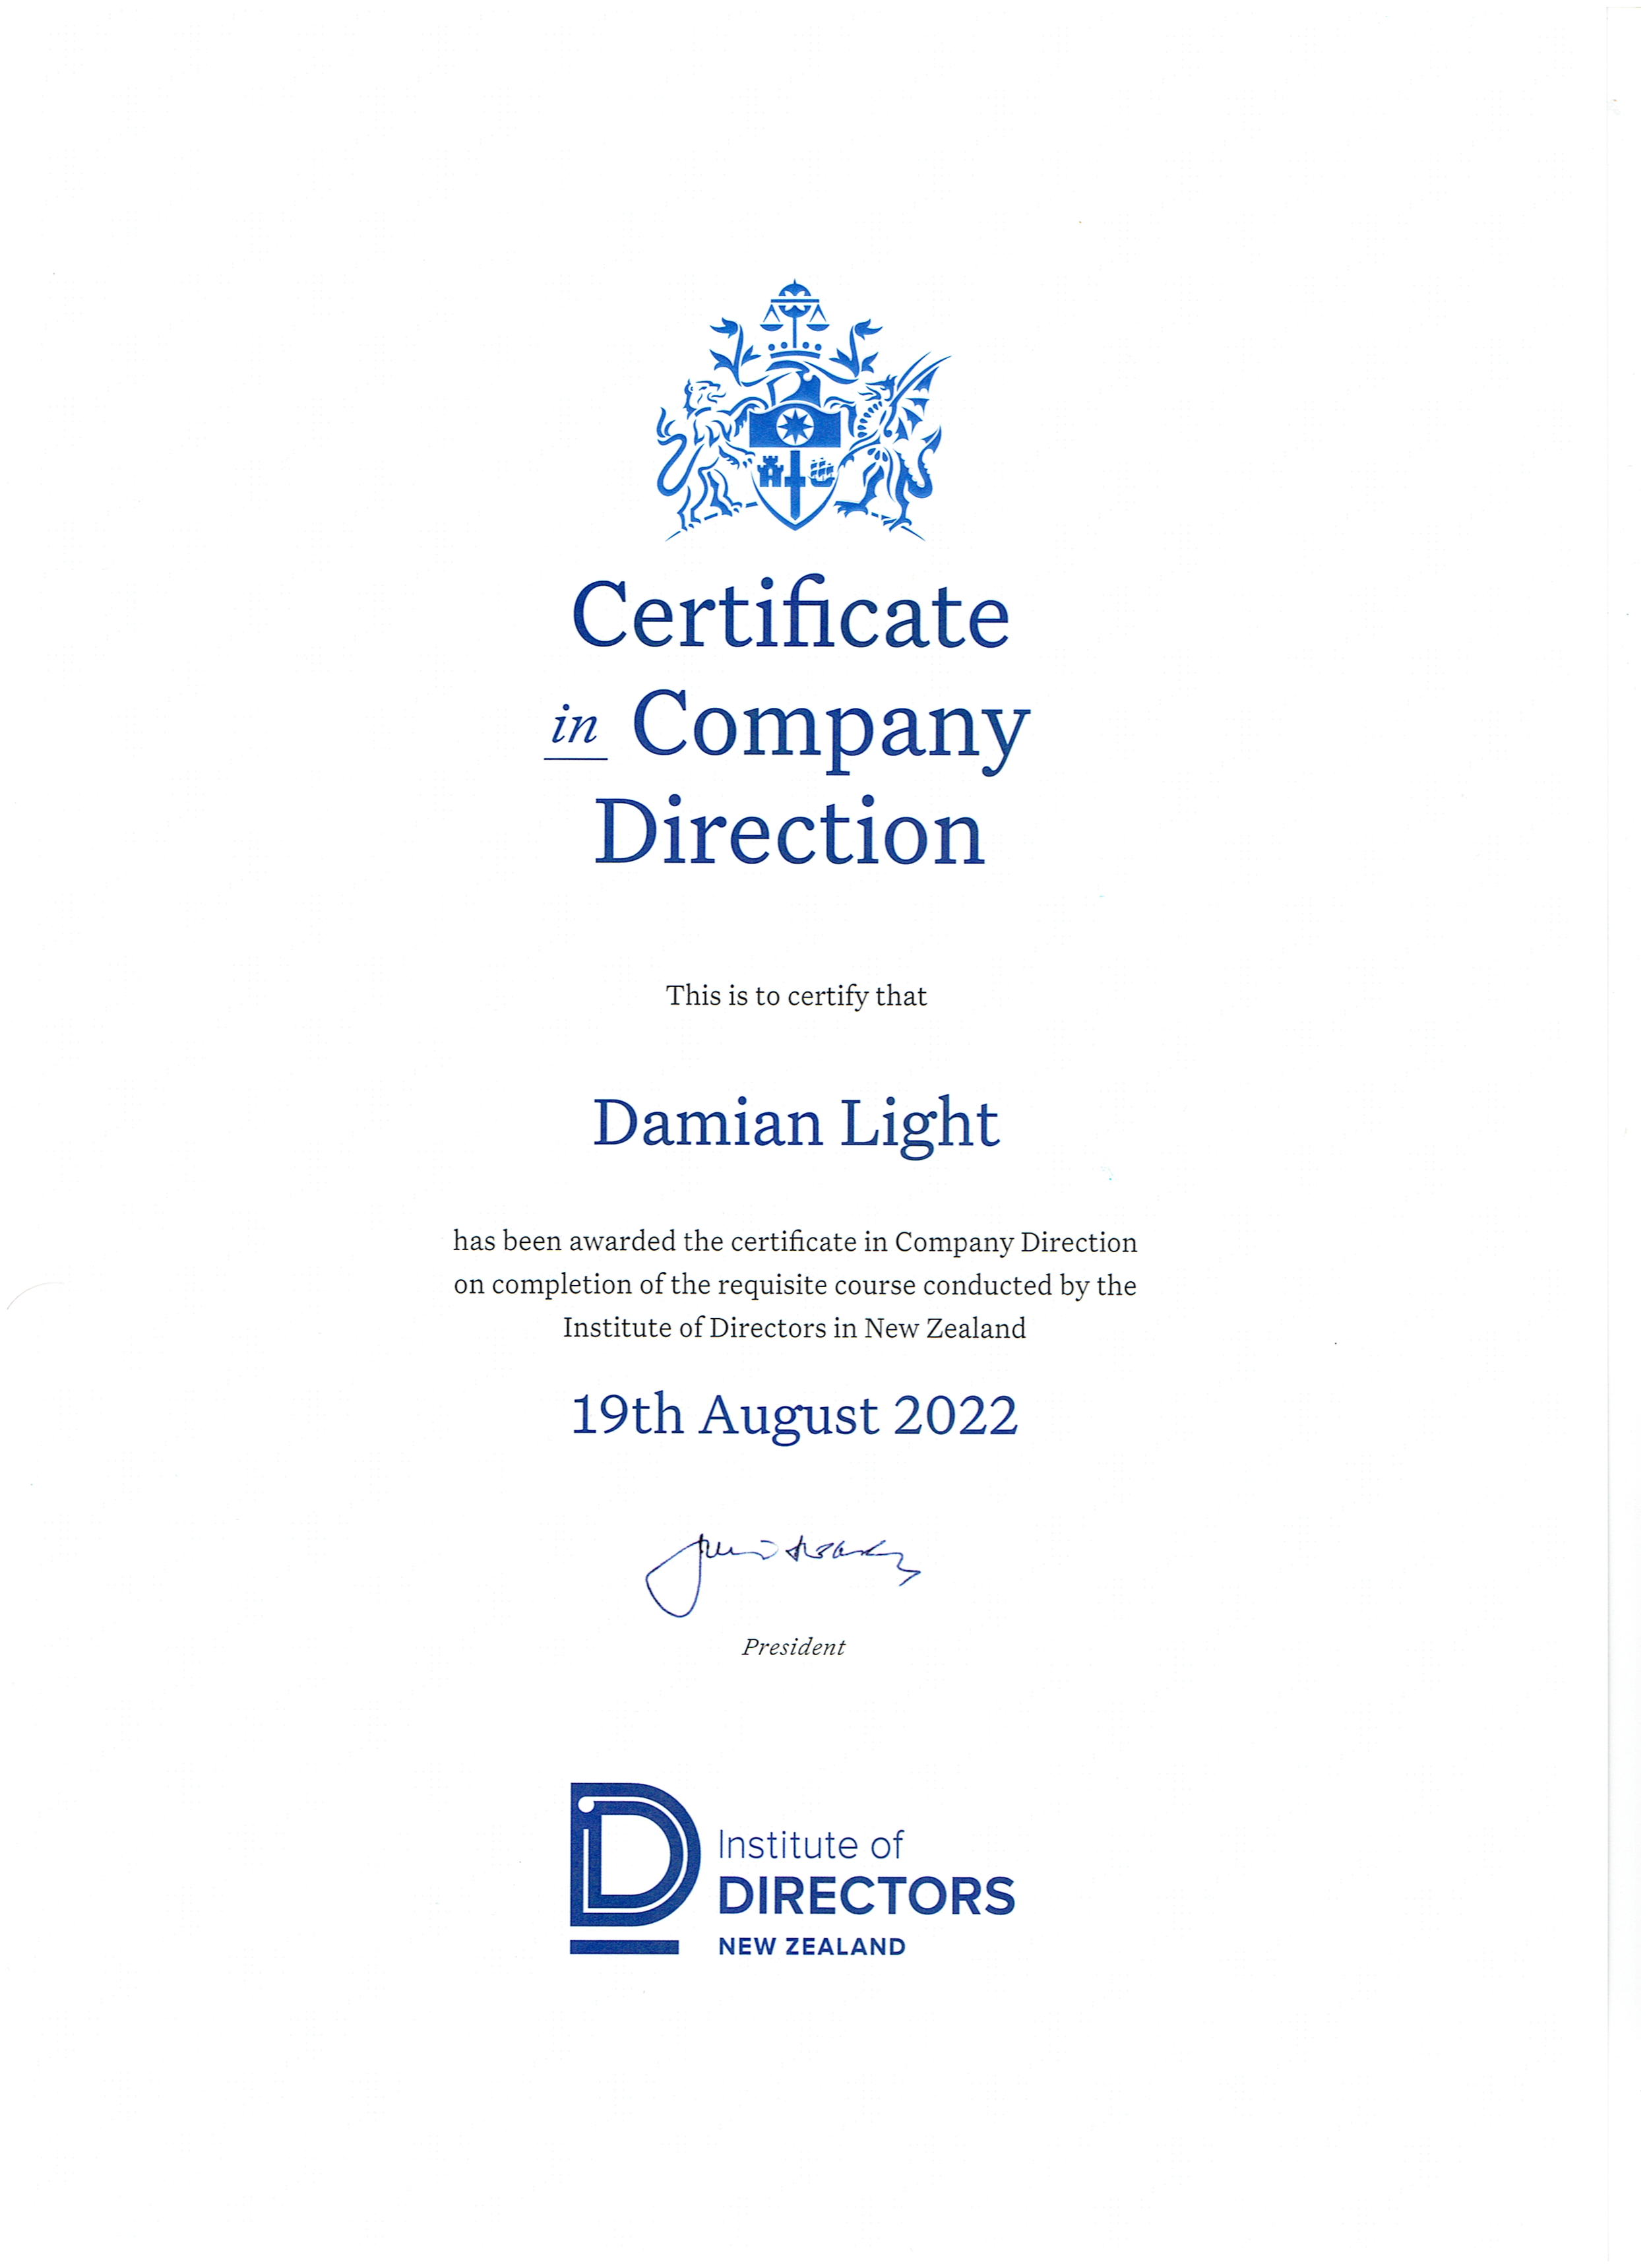 Certificate in Company Direction